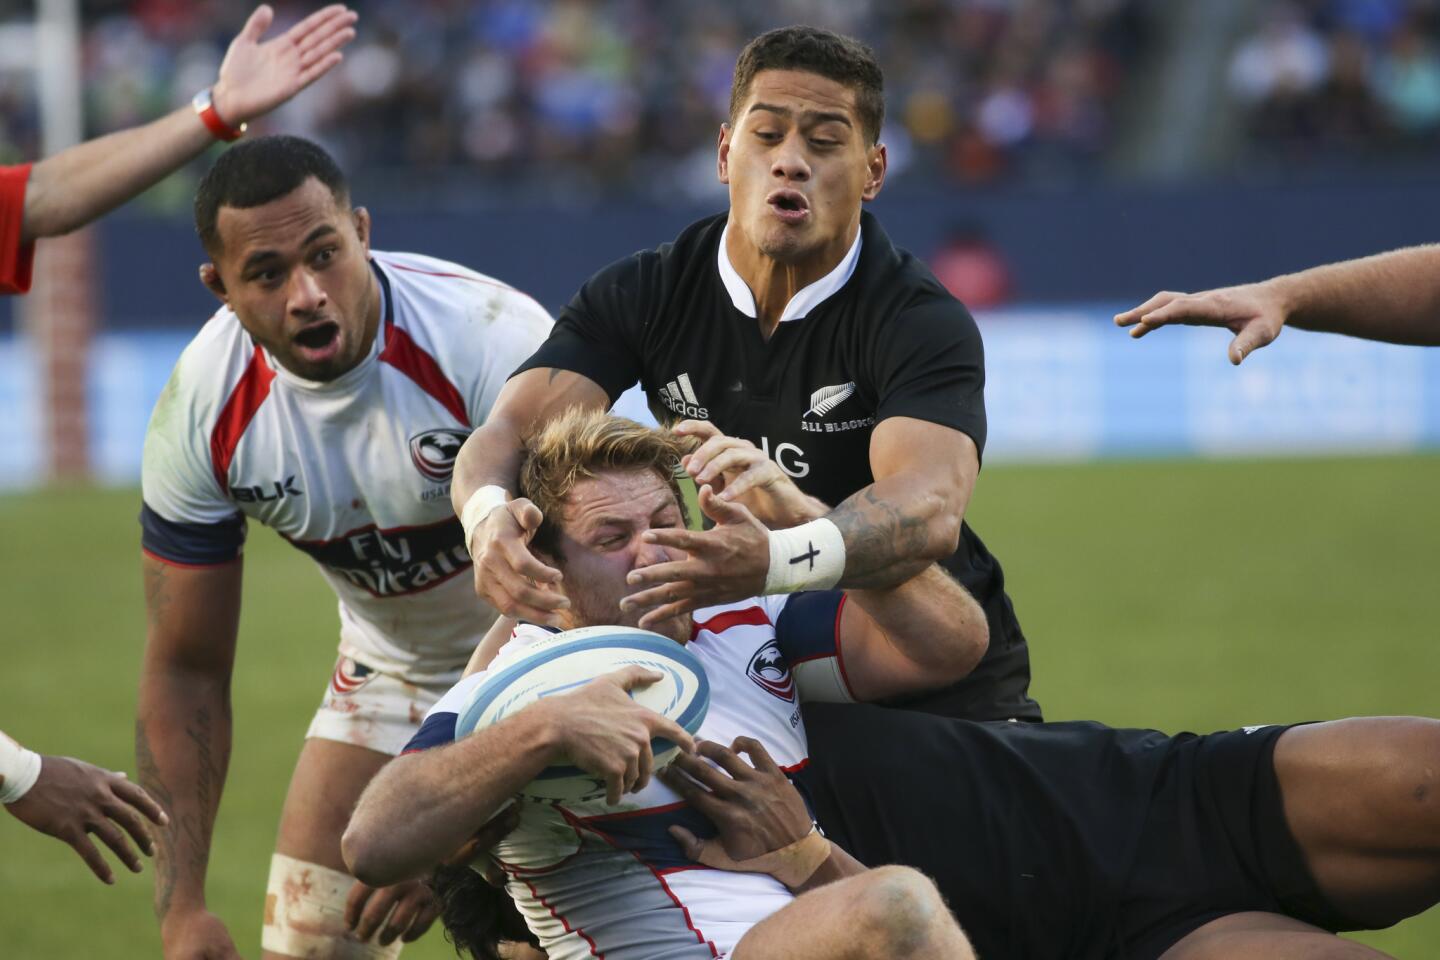 USA Eagles' Tom Coolican (16) gets tackled by New Zealand All Blacks' Julian Savea (23) and Augustine Pulu (21) during the second half.